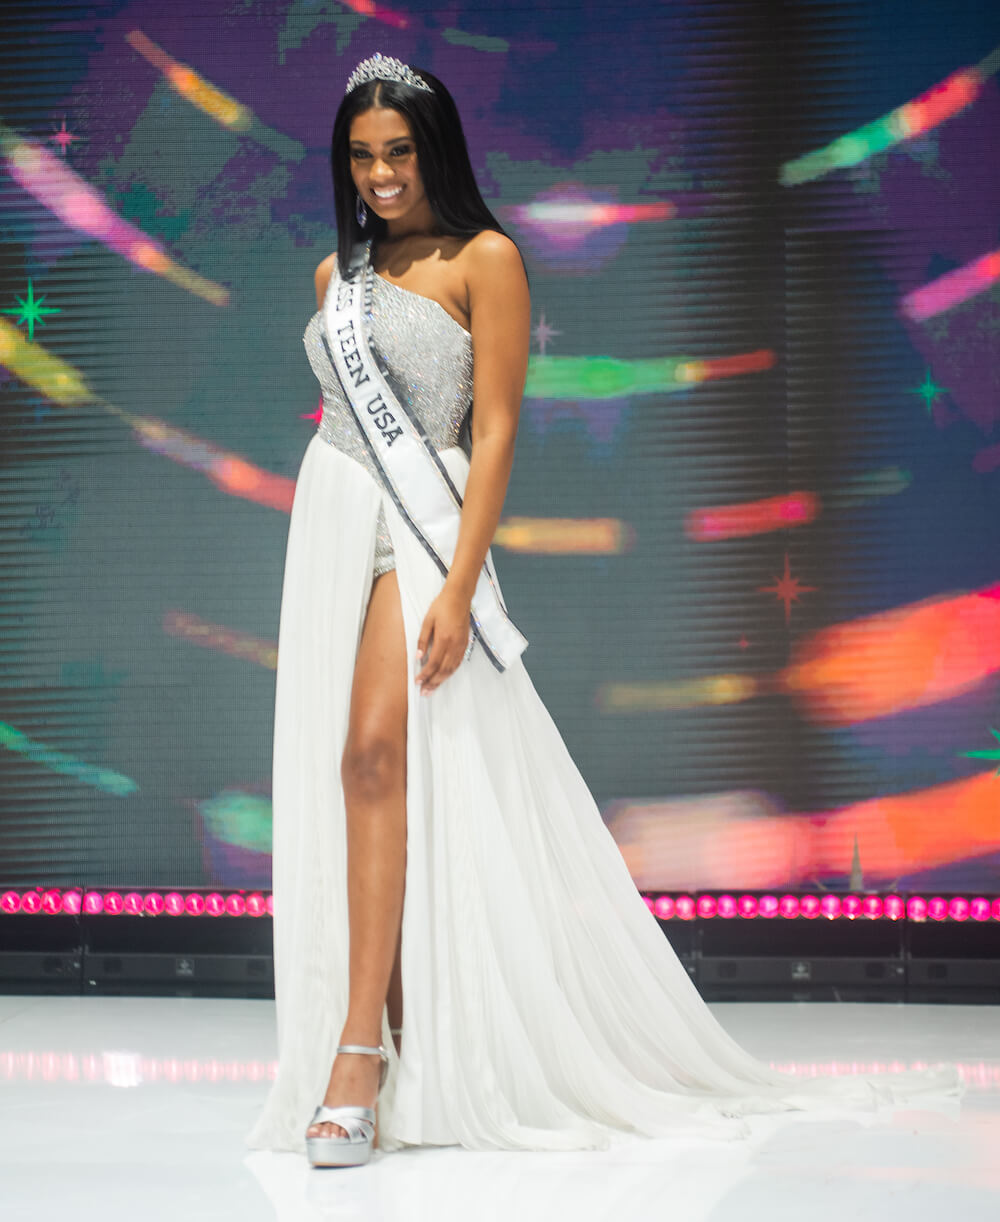 Breanna Myles in her evening gown during the Miss Teen USA 2021 final competition